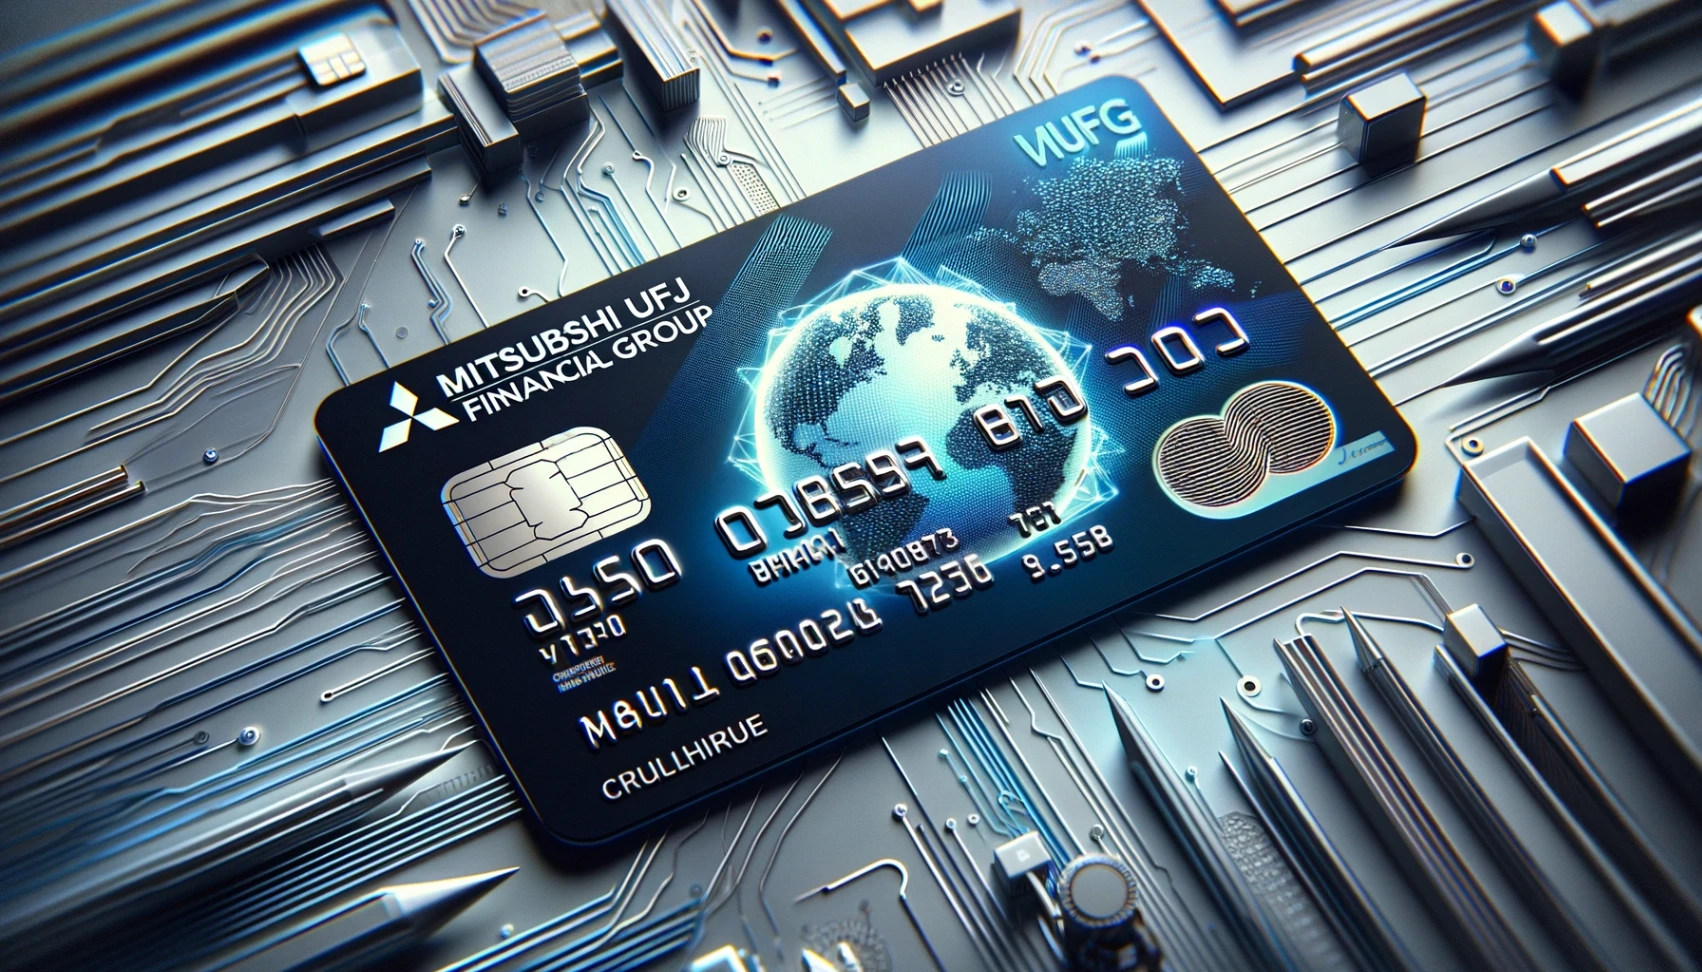 Simplify Your Mitsubishi UFJ Credit Card Application With This Guide